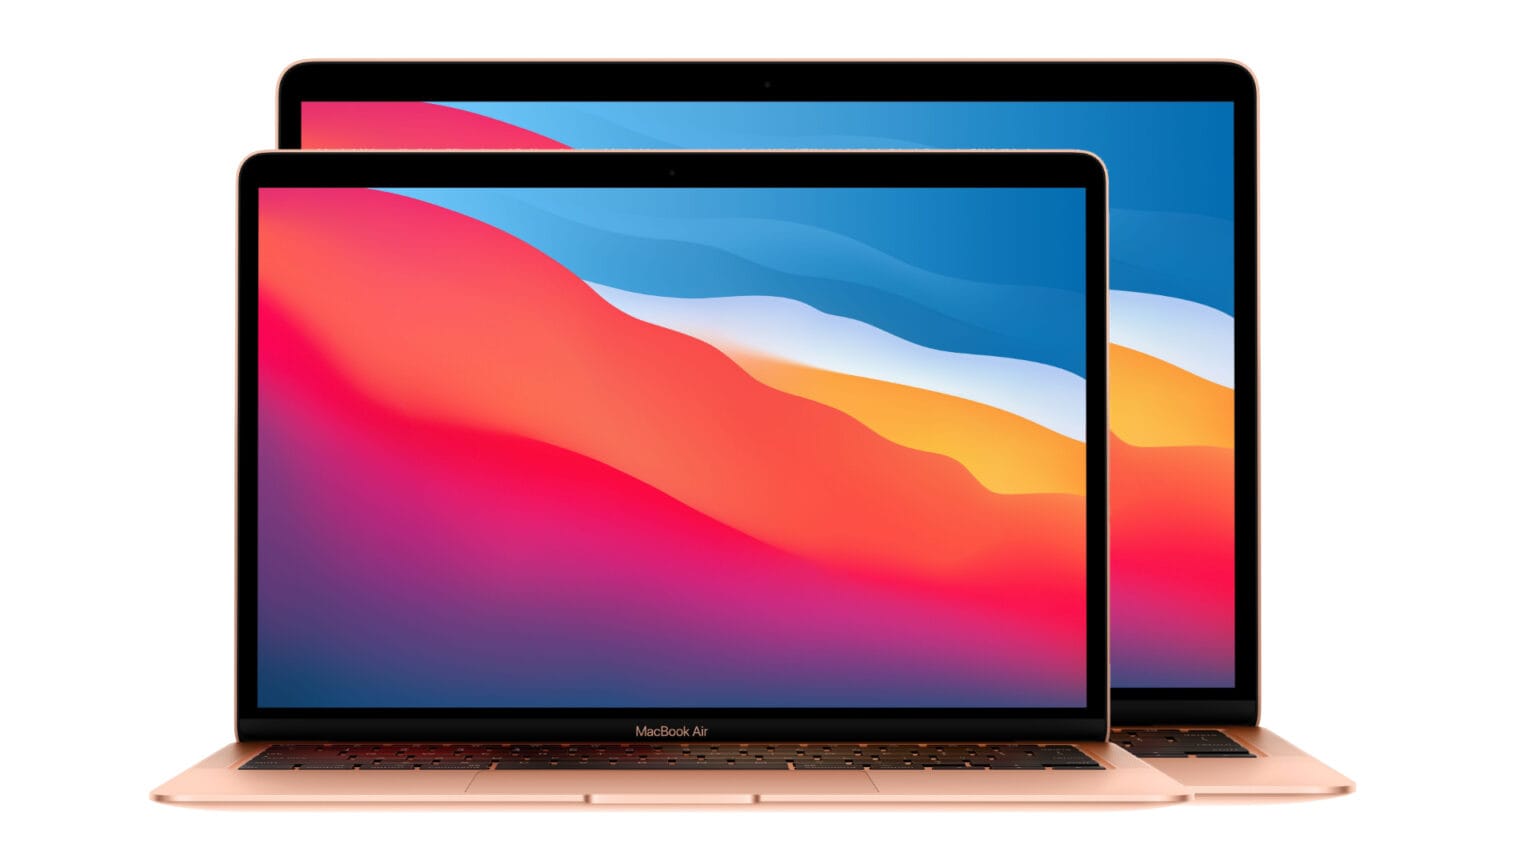 15-inch MacBook Air may get a new name